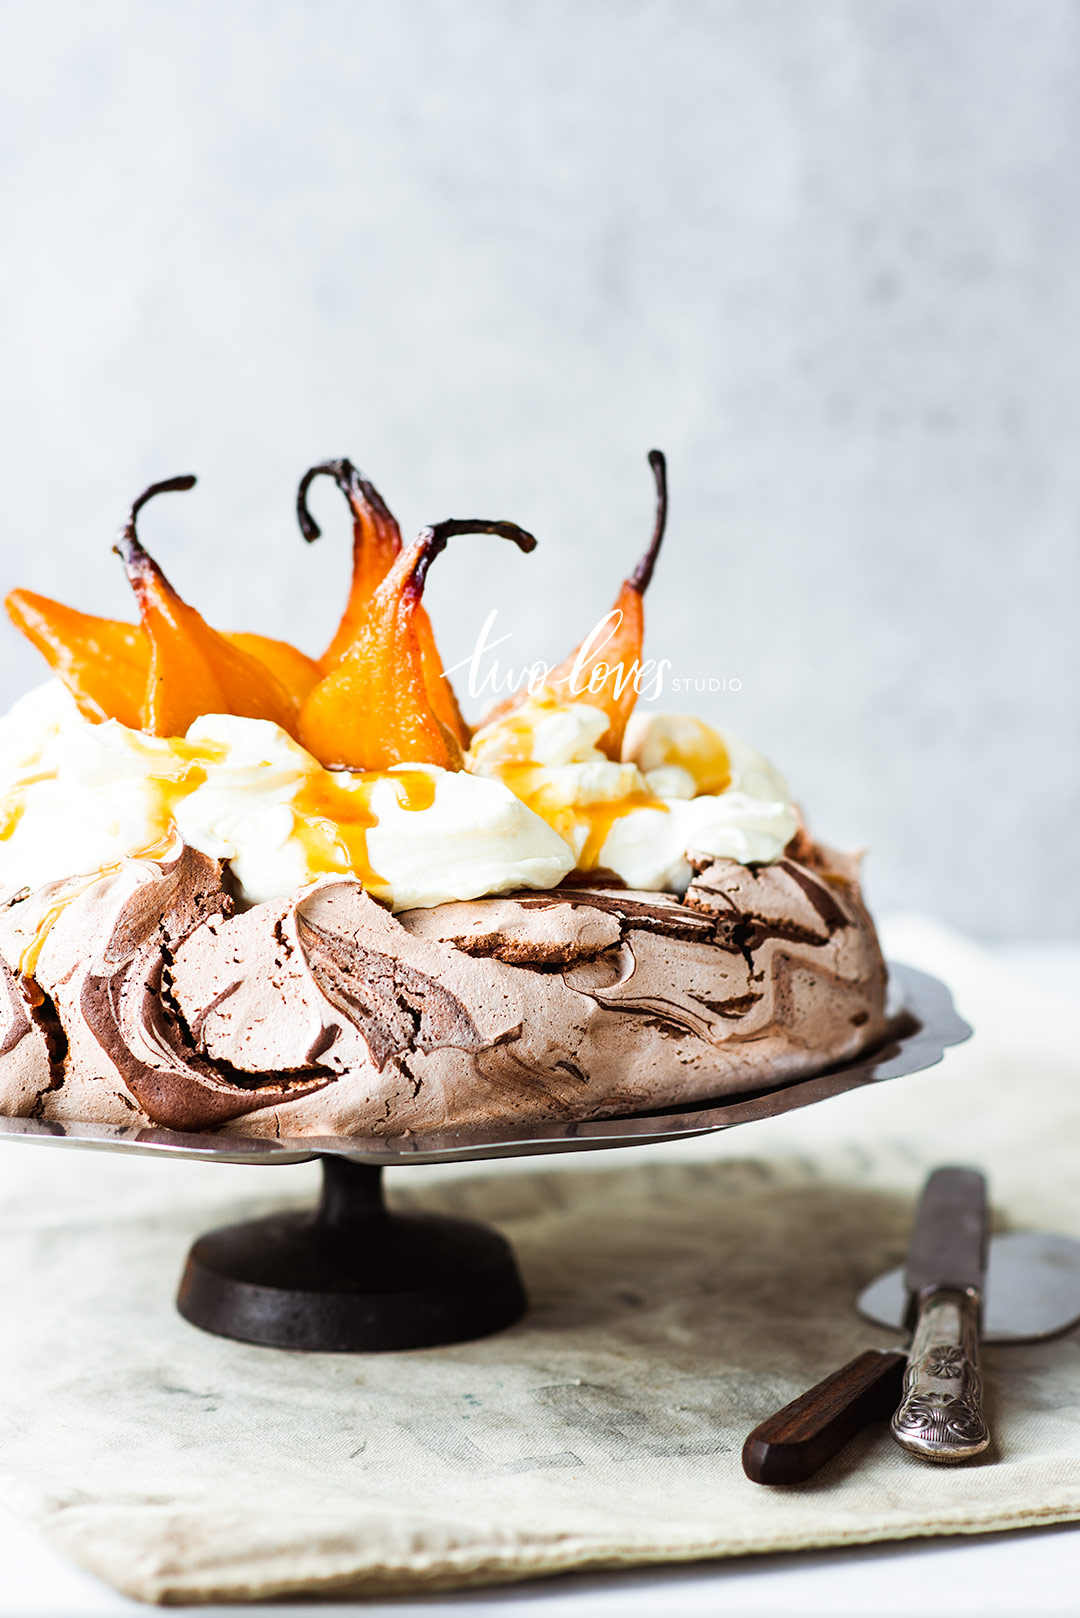 A chocolate meringue with caramelized pears on top  